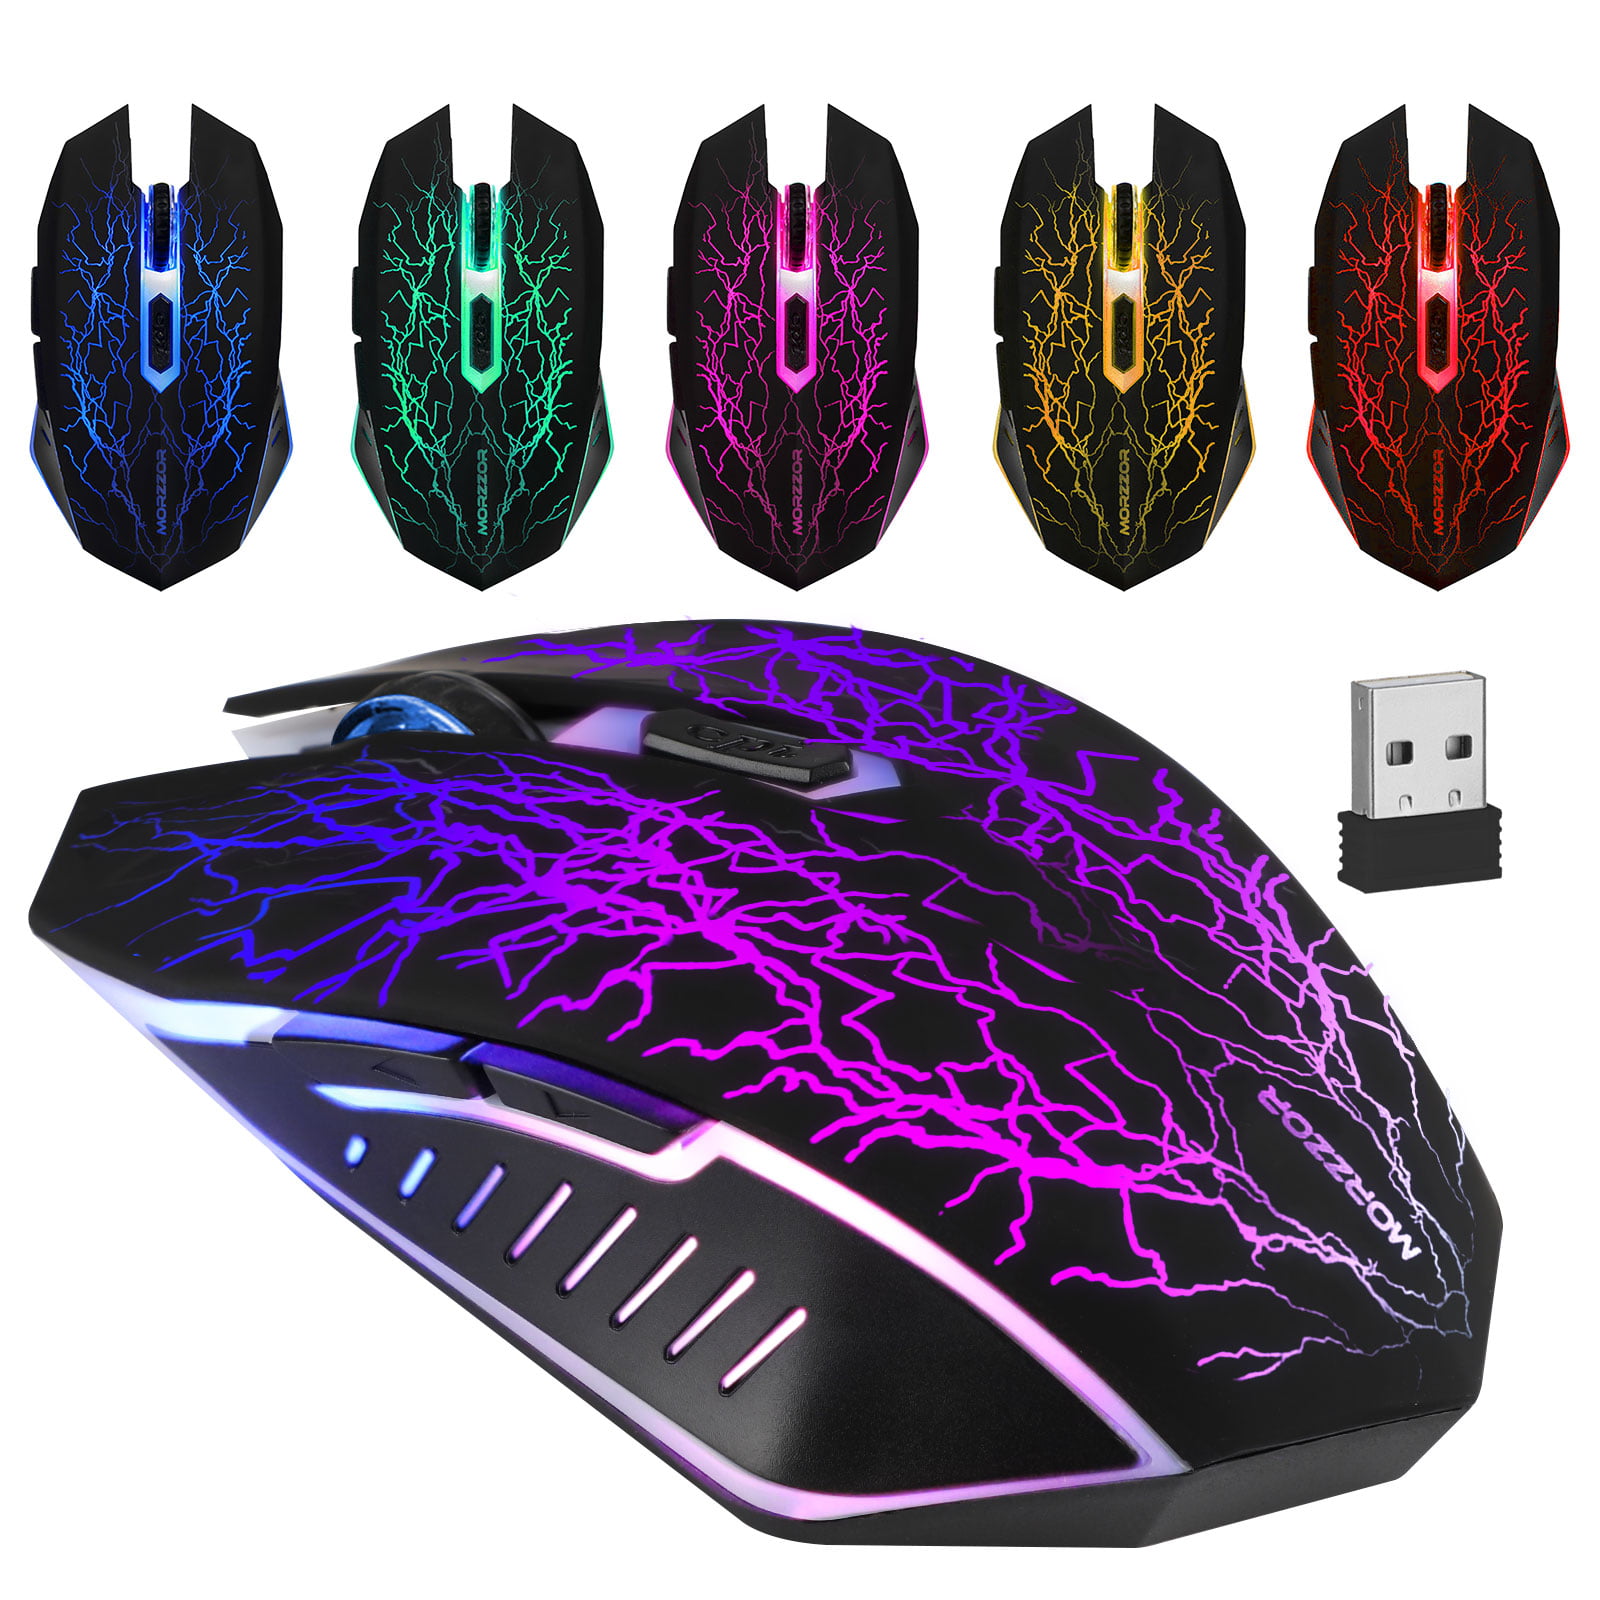 Blue Ergonomic Wireless Gaming Mouse With USB Nano Receiver For PC Laptop 